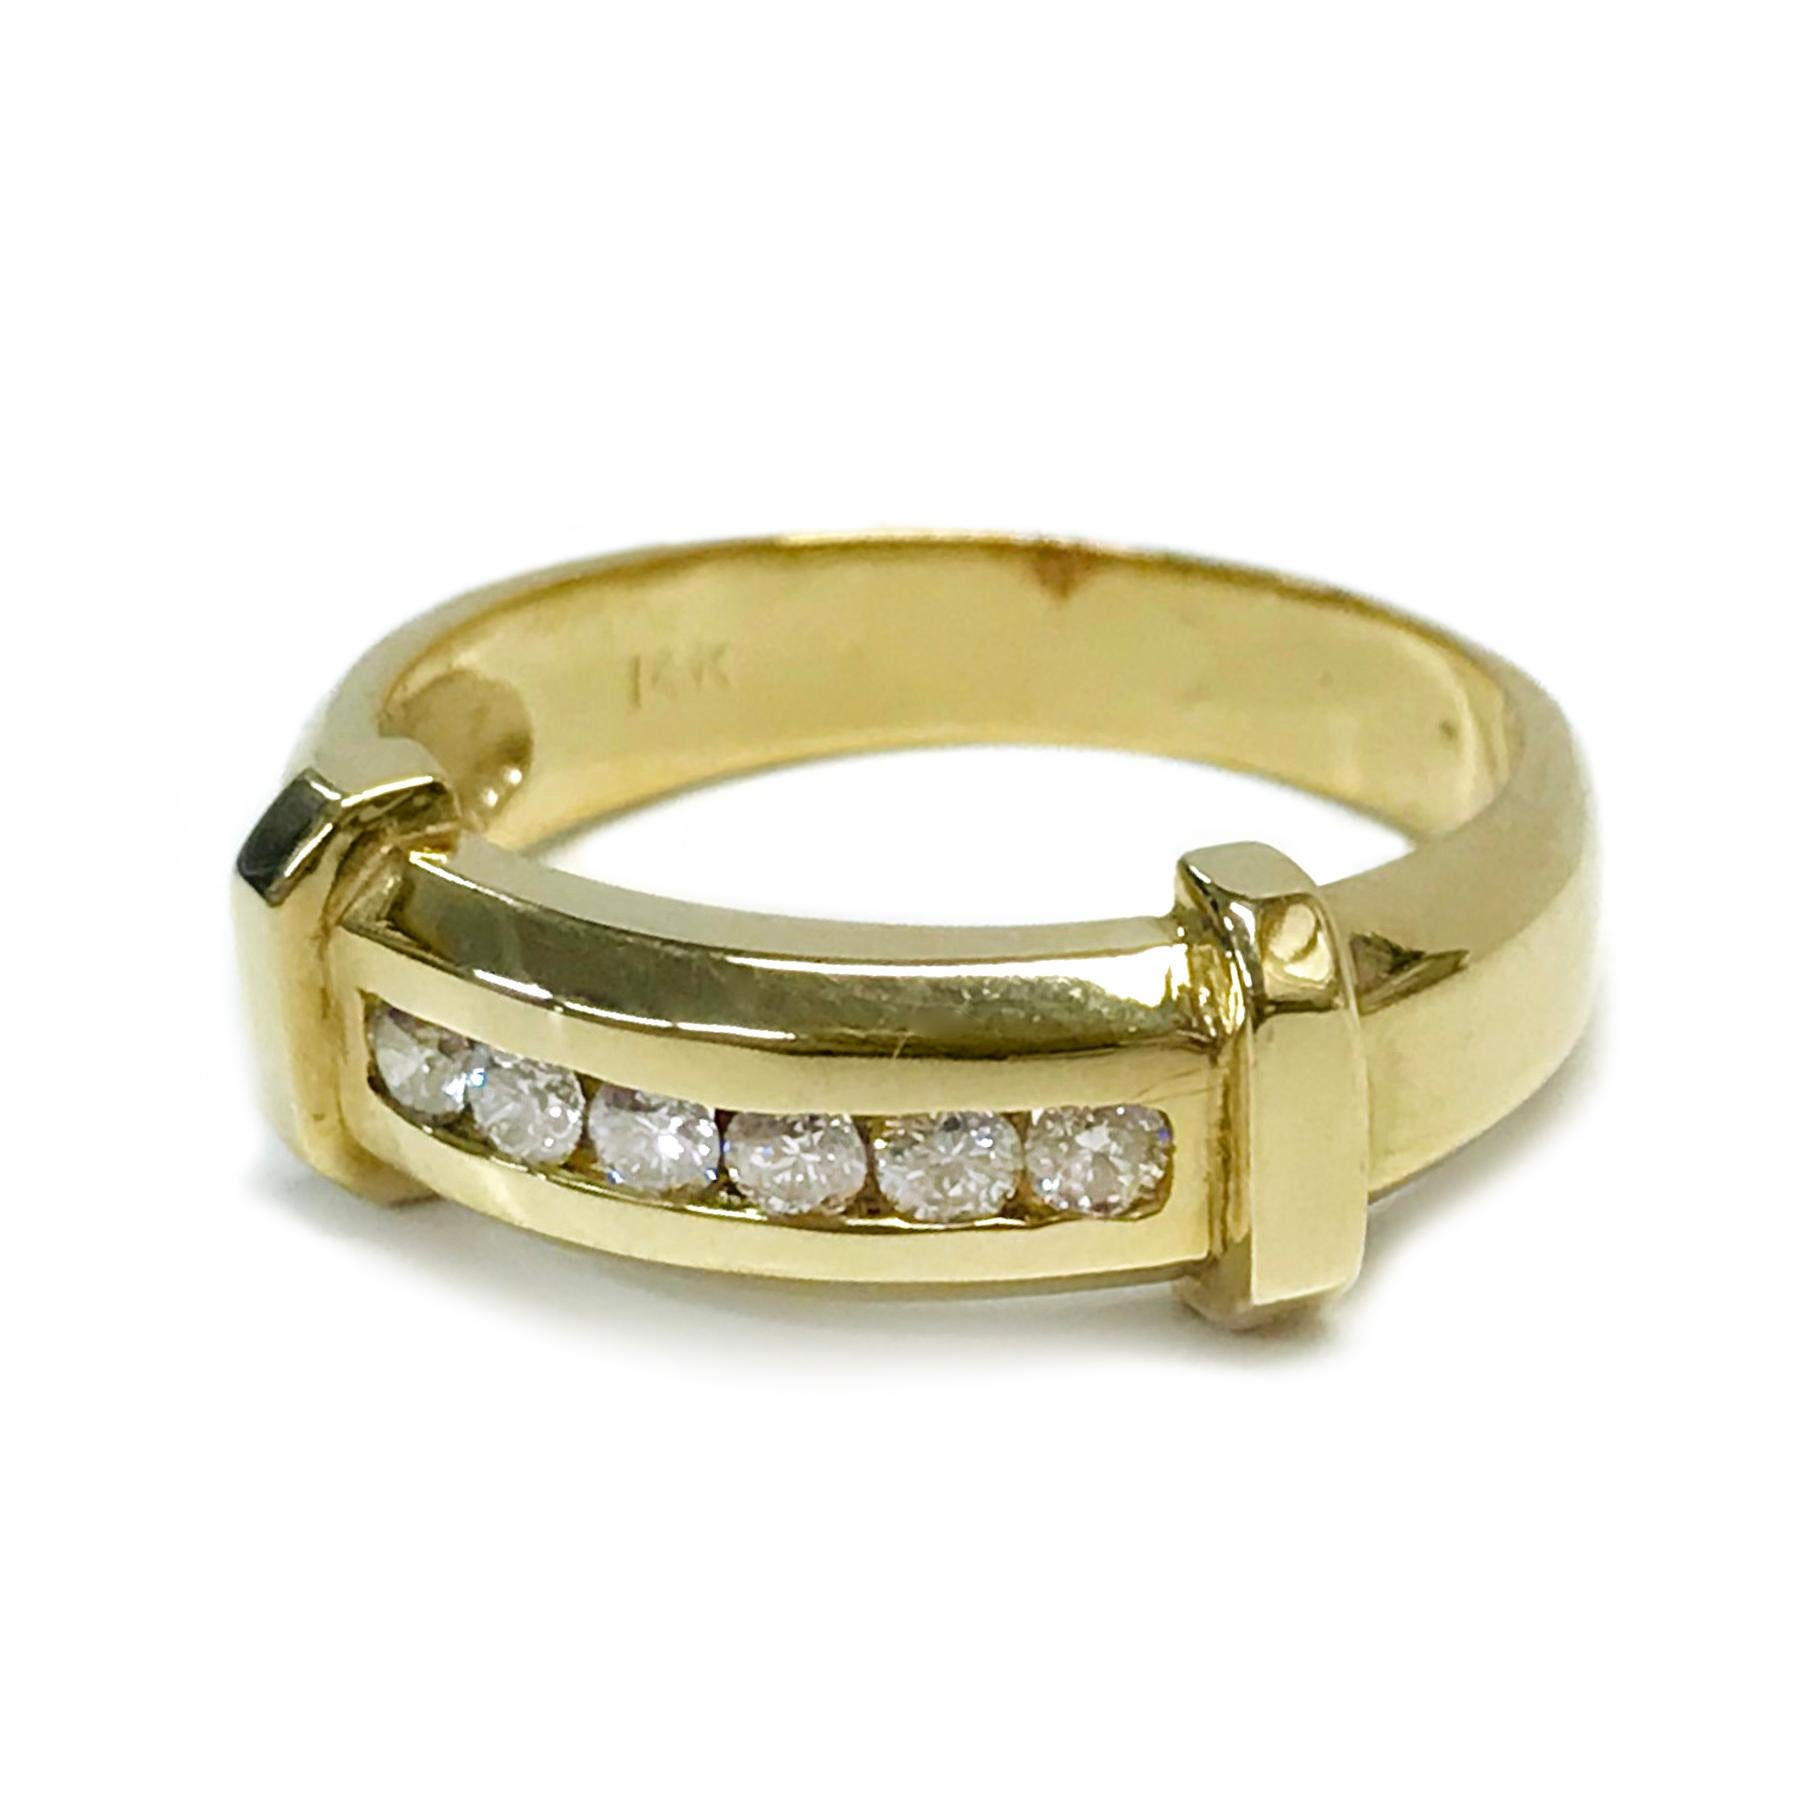 14 Karat Six Diamond Ring. The ring features six round channel-set diamonds horizontally-set at the center with one gold bar at the beginning of the first and the end of the last diamond. The six diamonds have a total carat weight of 0.36ctw.